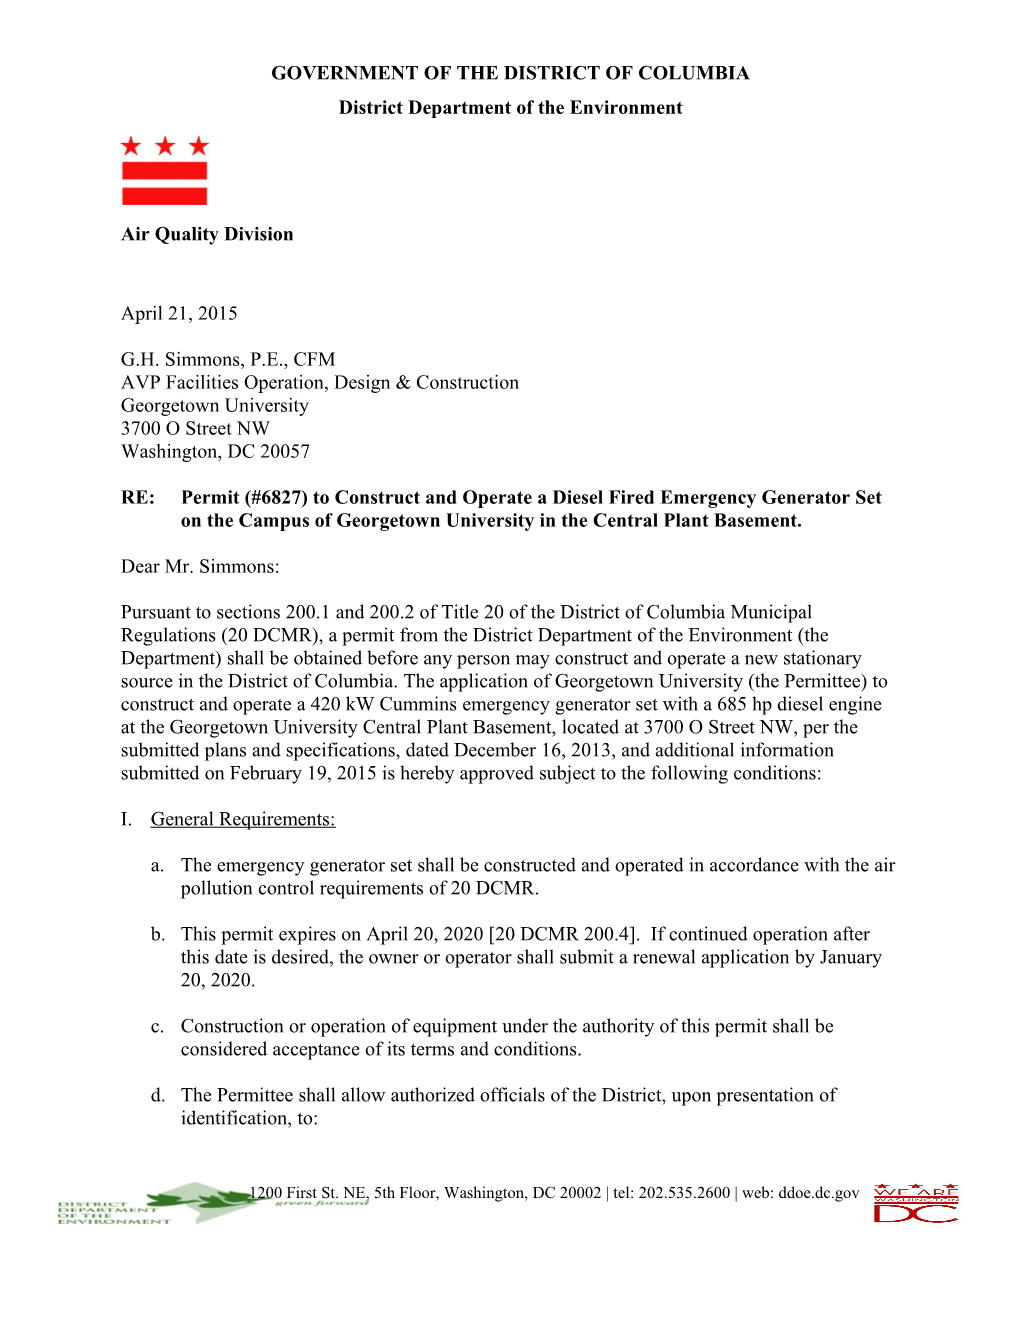 Permit (#6827) to Construct and Operate a Diesel Fired Emergency Generator